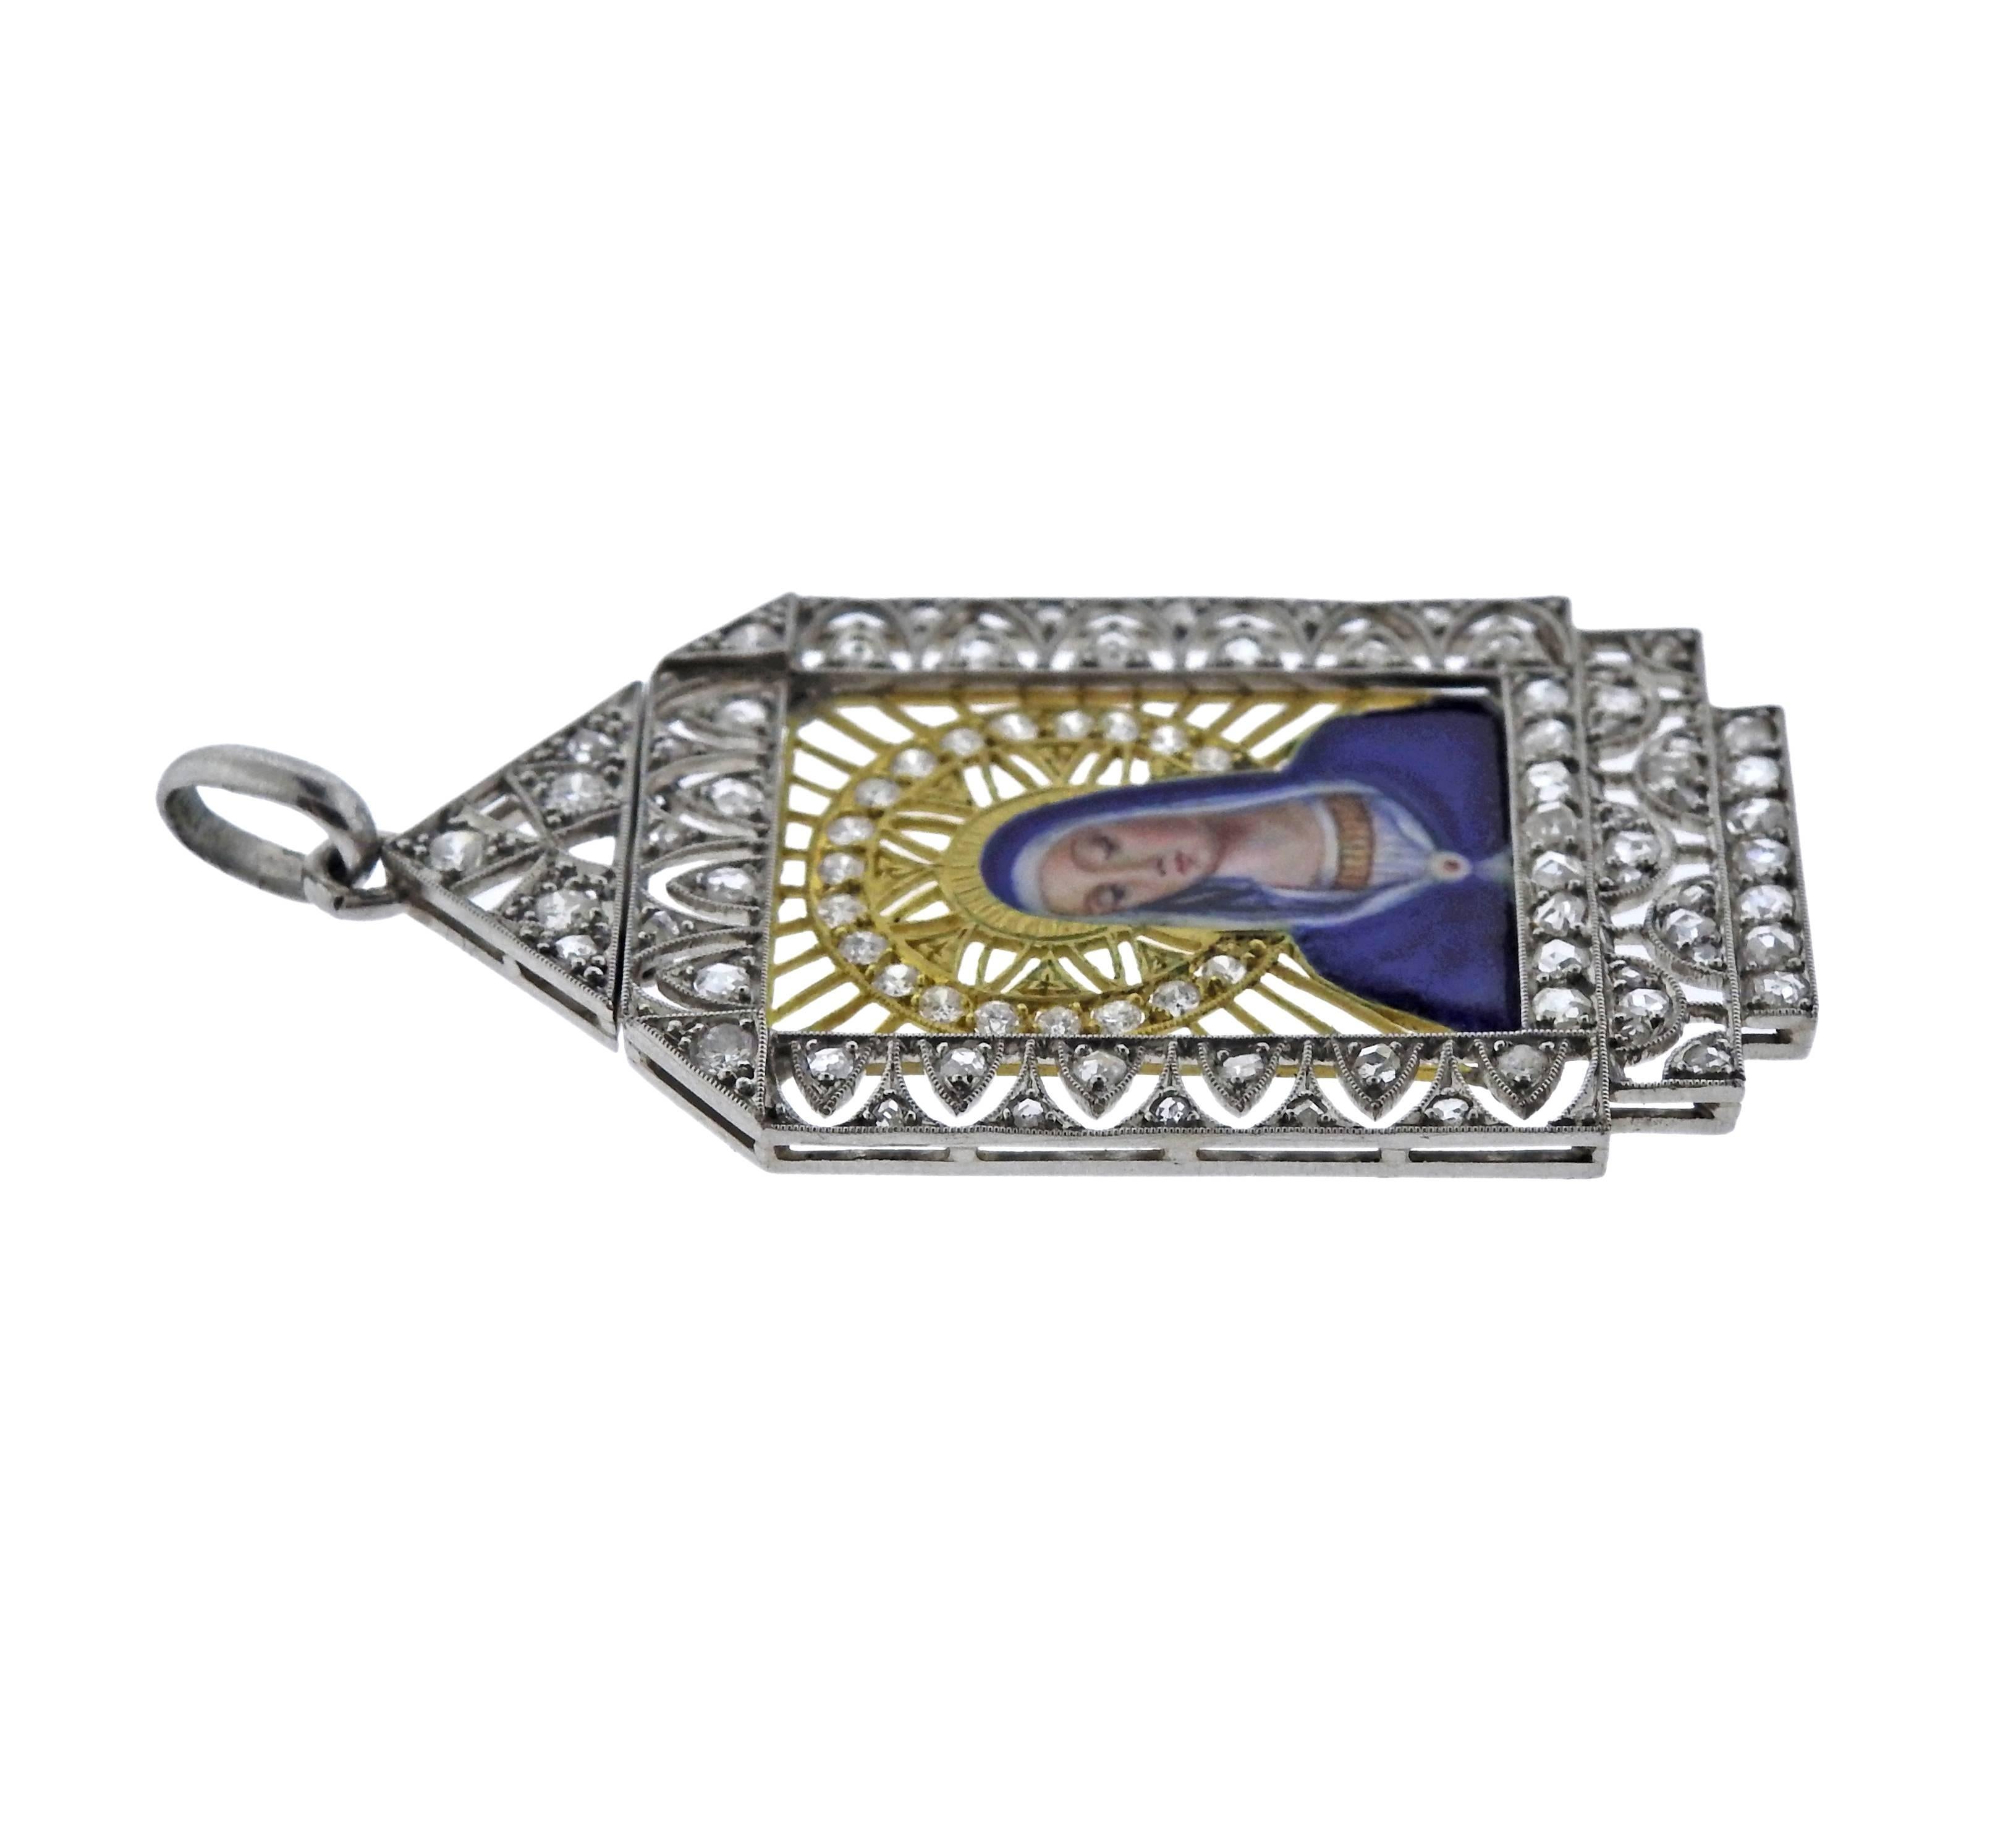 Rare and original Masriera Art Deco circa 1929 pendant, set in platinum and 18k gold, depicting Saint Mary, adorned with rose cut and round brilliant diamonds and enamel. Pendant is 50mm long x 25mm at widest point, weighs 7.6 grams. Marked: